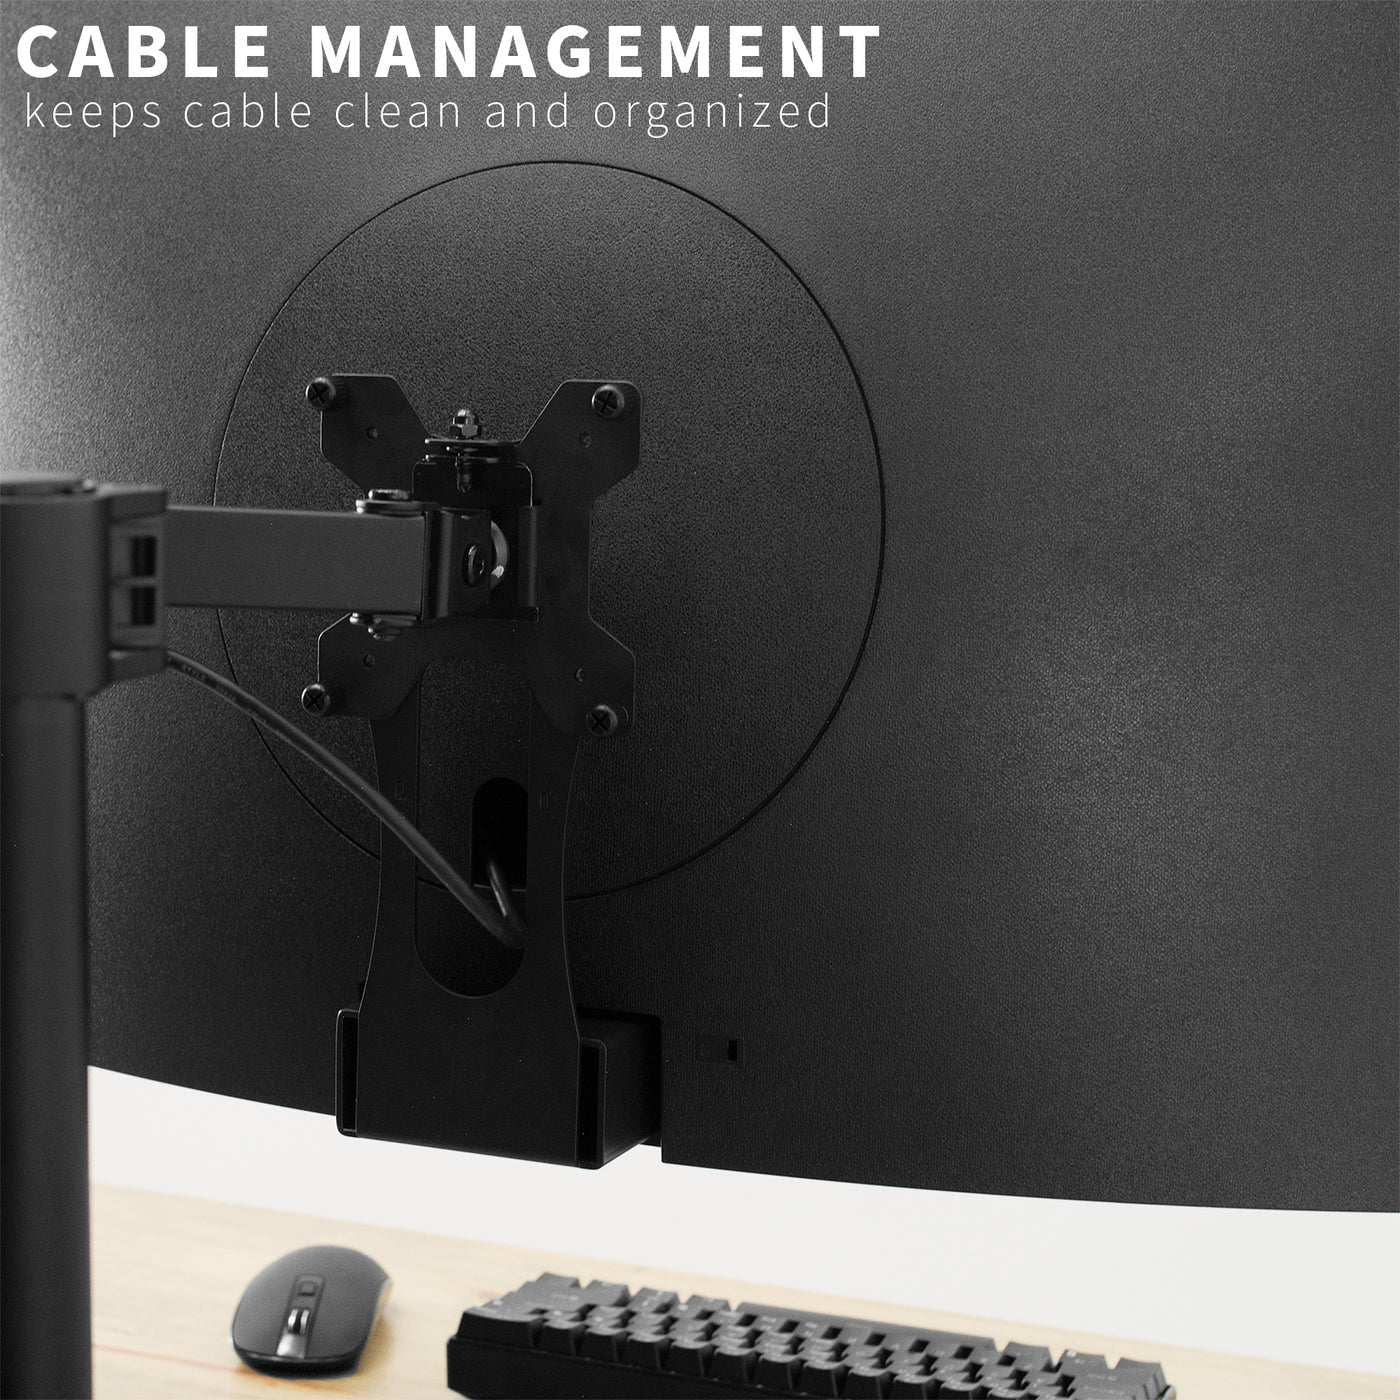 Cable management is integrated into the VESA bracket to maintain an organized workspace.